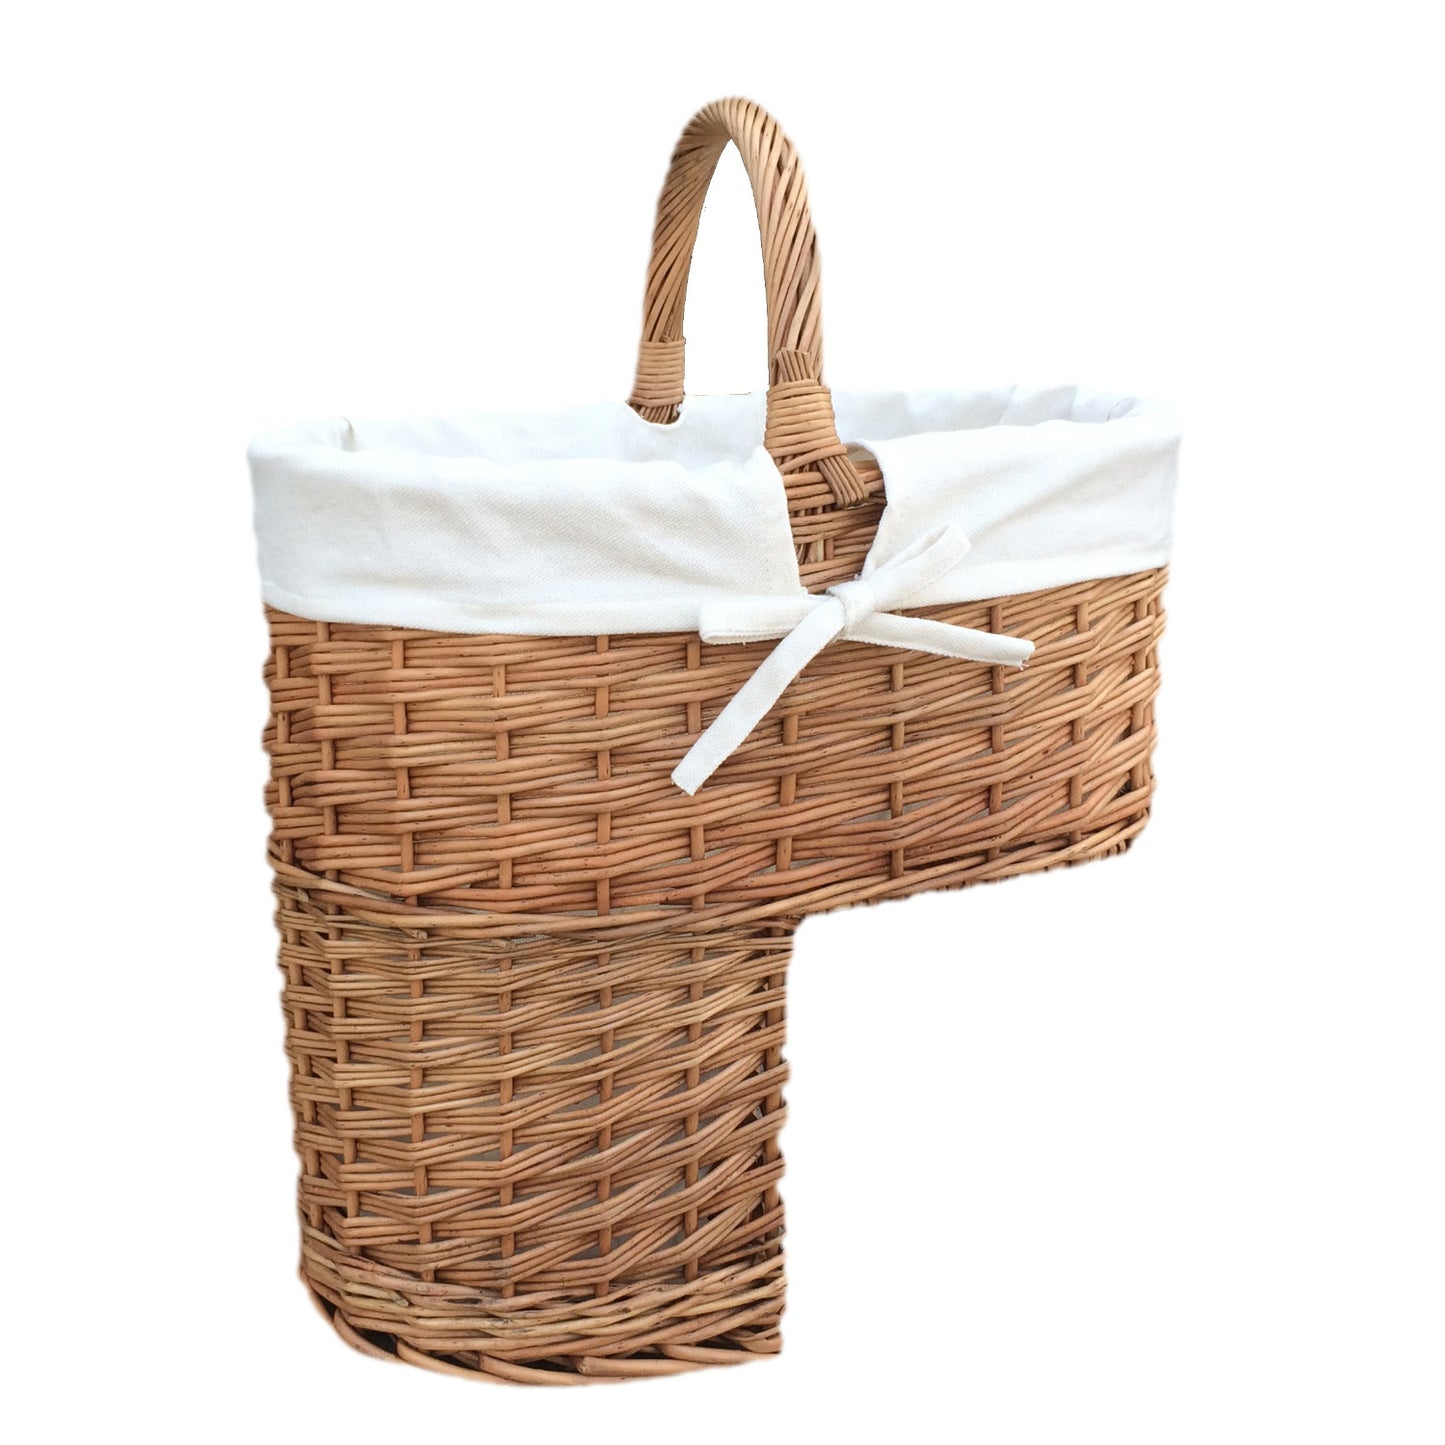 Double Steamed Stair Basket With White Lining